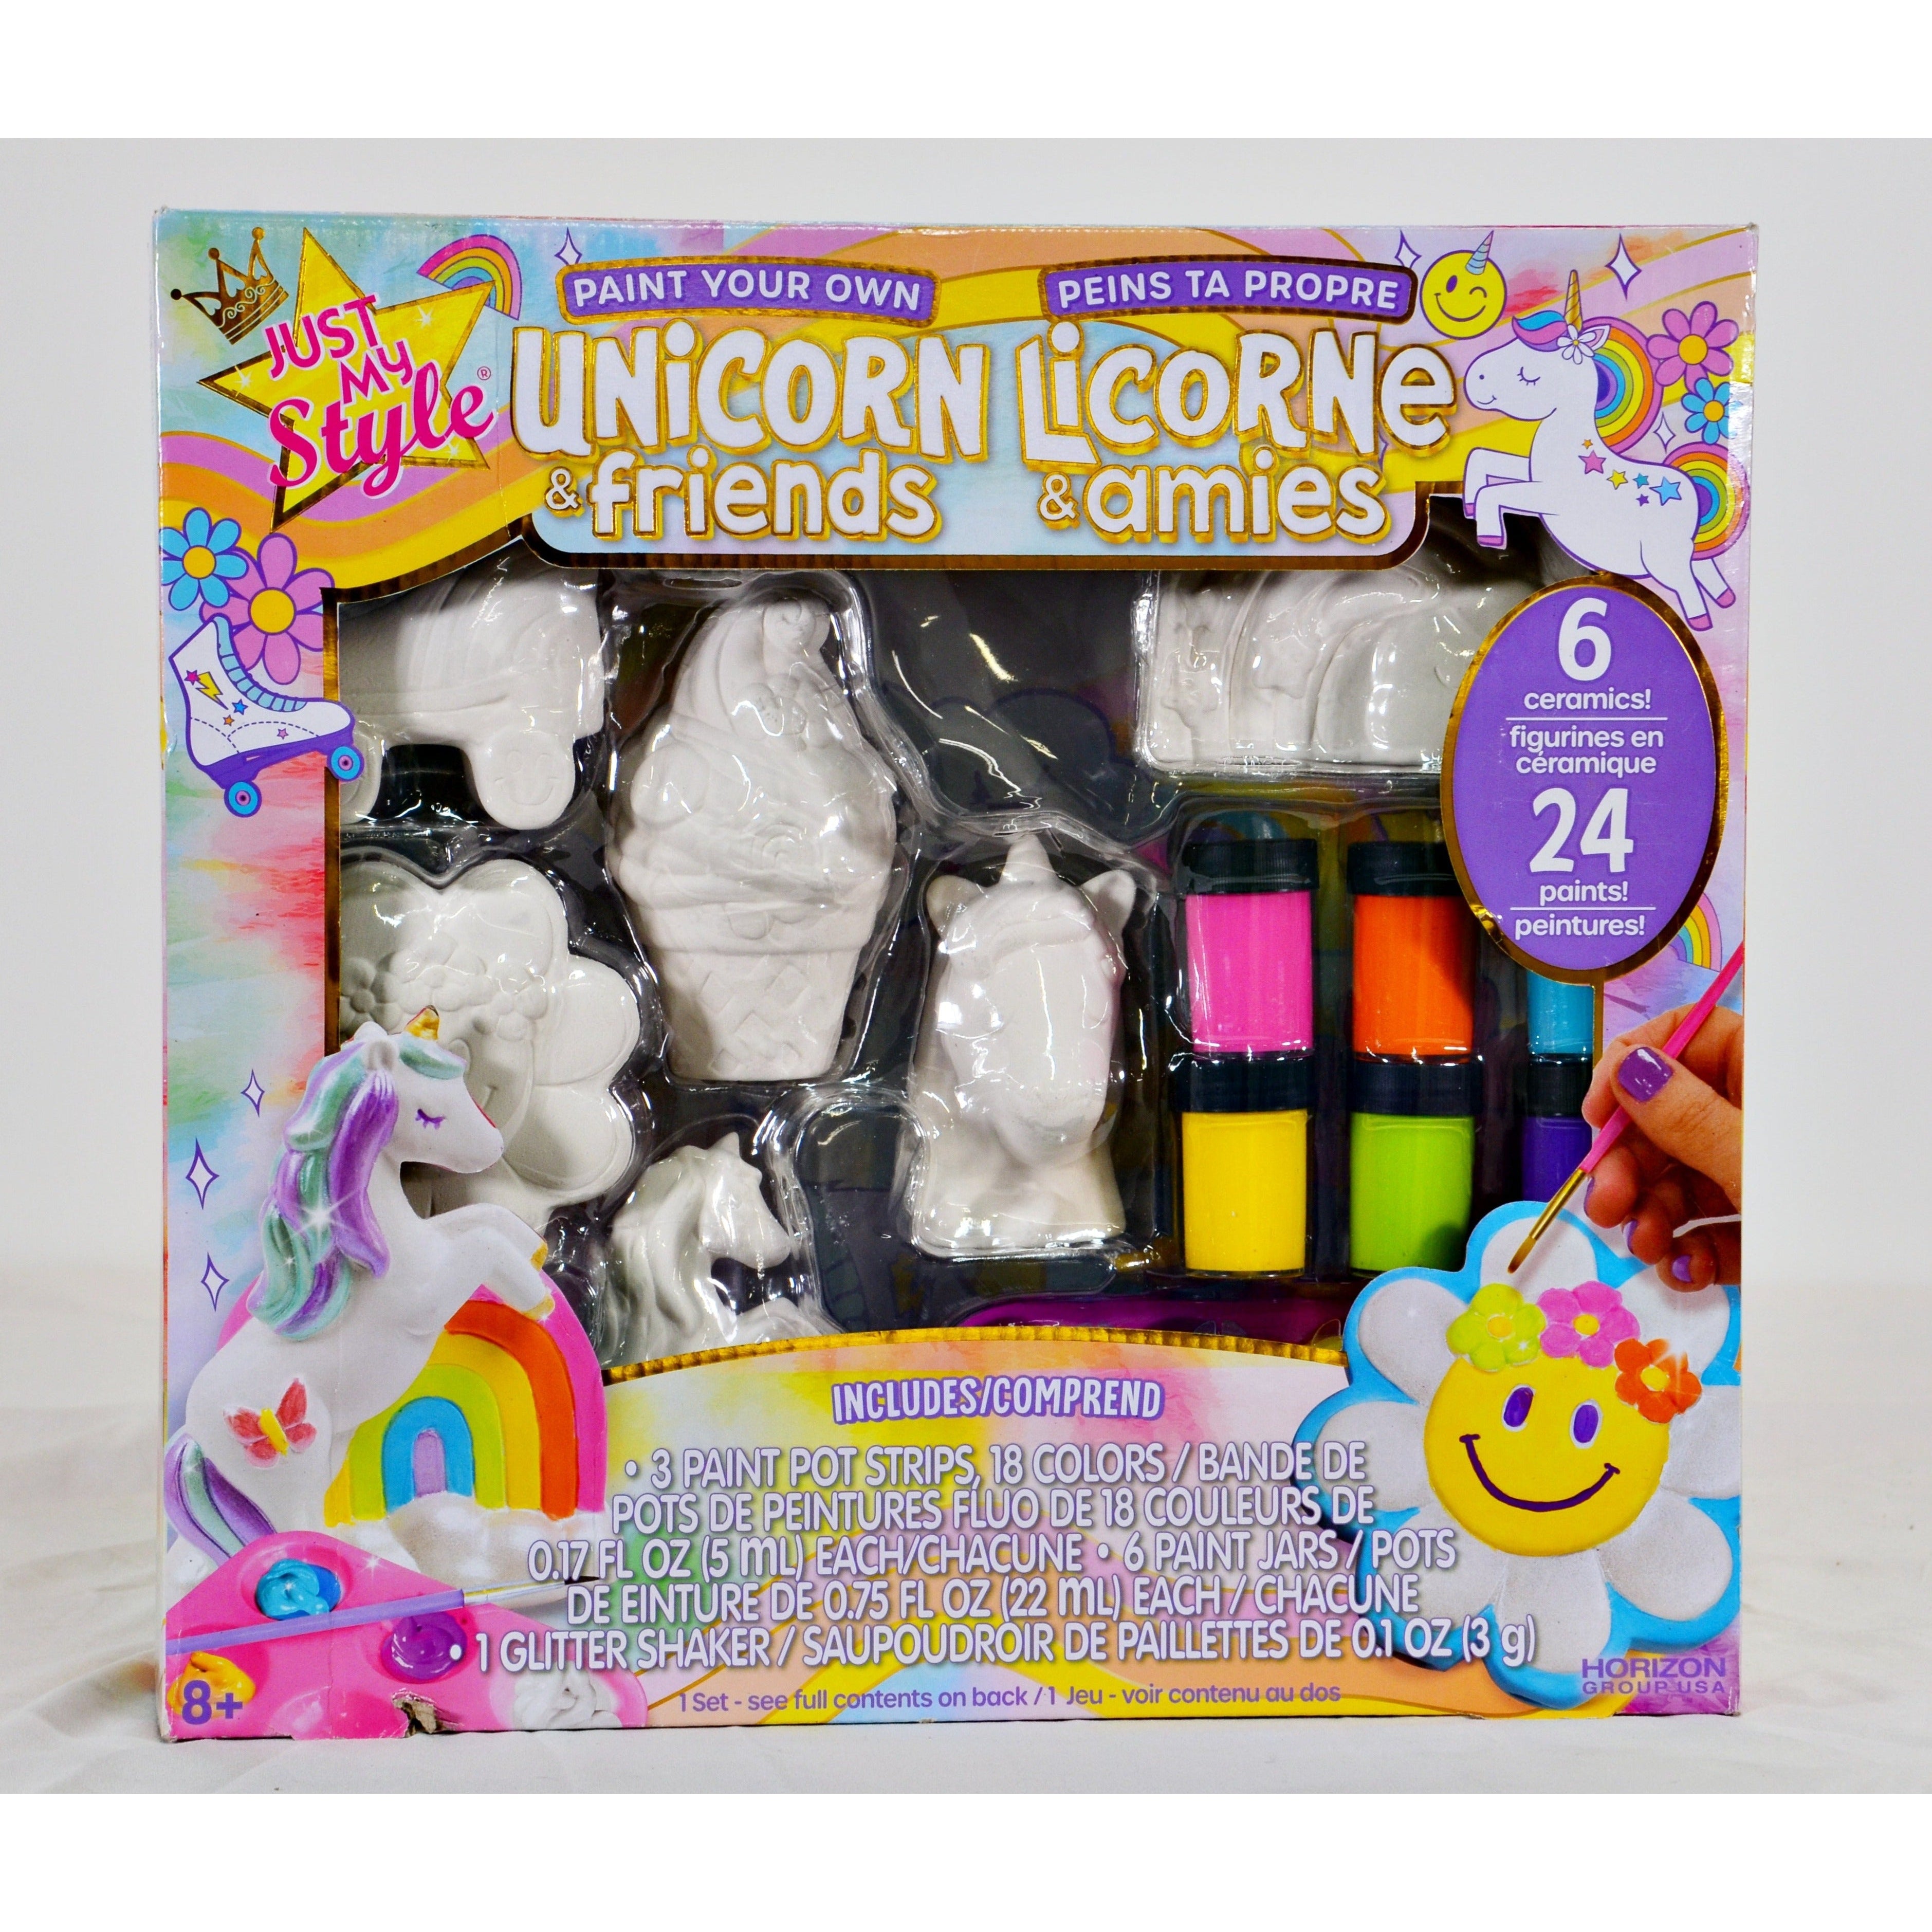  Just My Style Paint Your Own Scented Unicorn Figurines